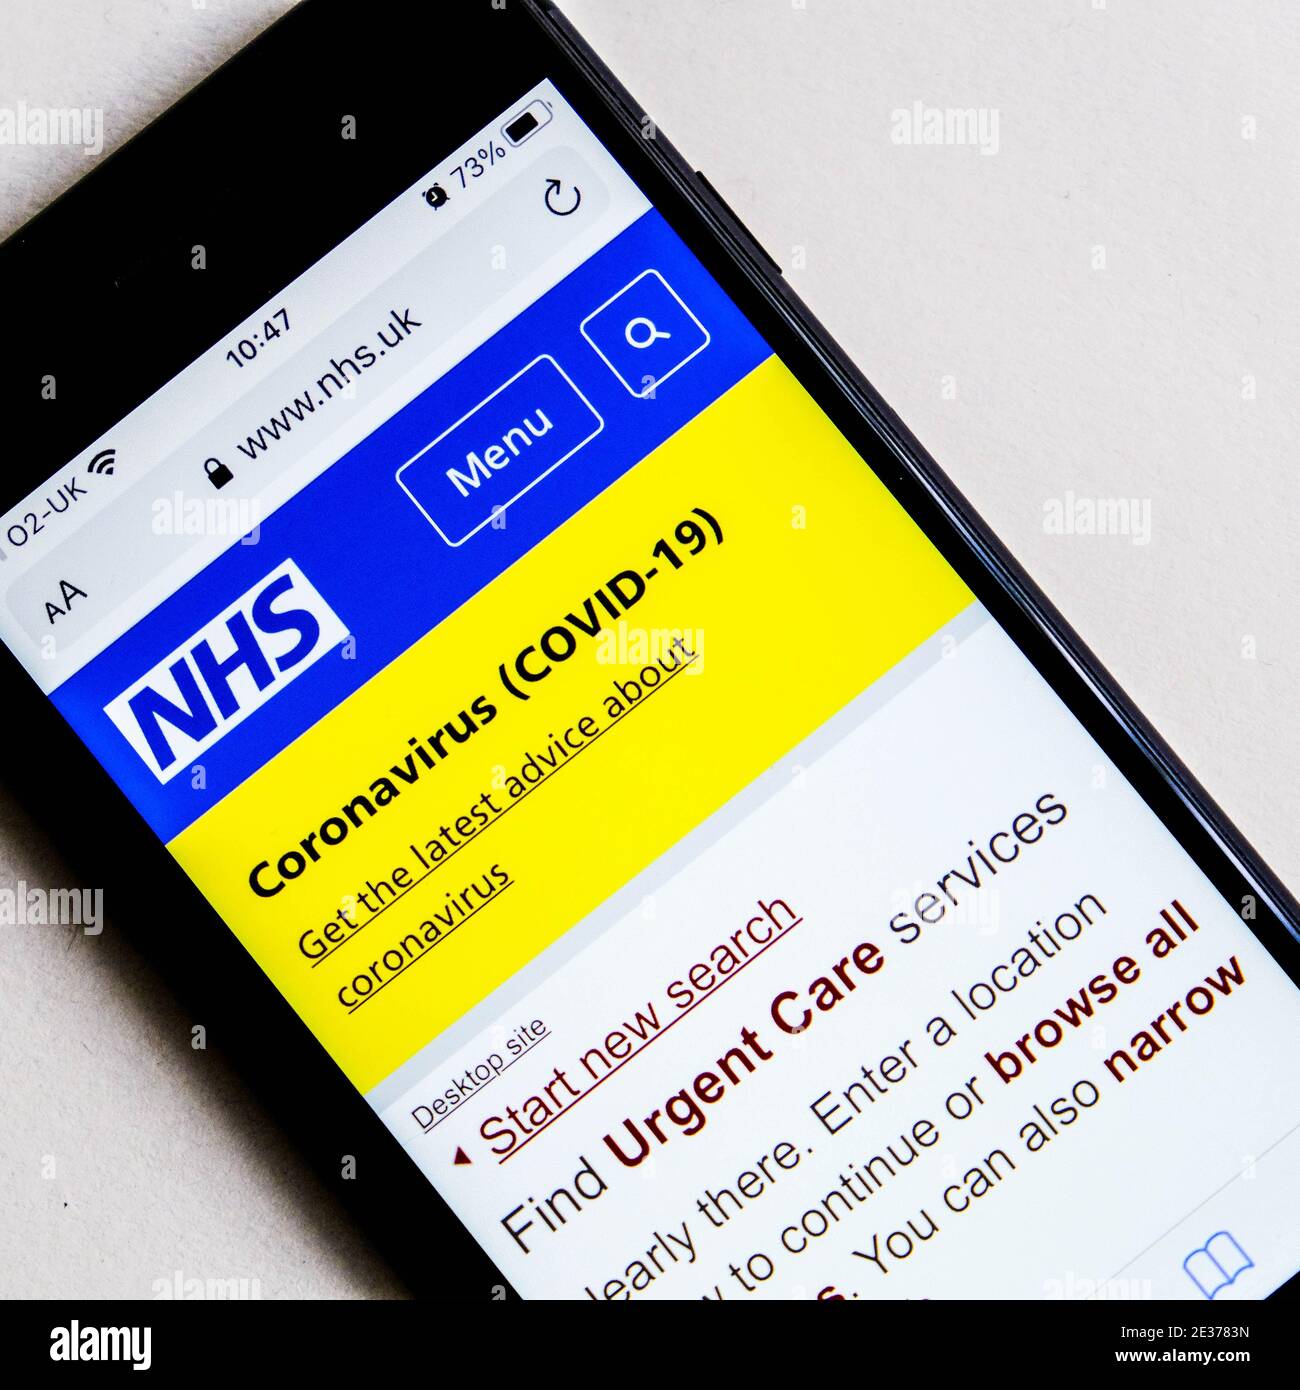 London UK, January 17 2021, NHS App Finding Urgent Or Emergency Care Services During Covid-19 Pandemic Screenshot On A Mobile Or Smart Phone Stock Photo